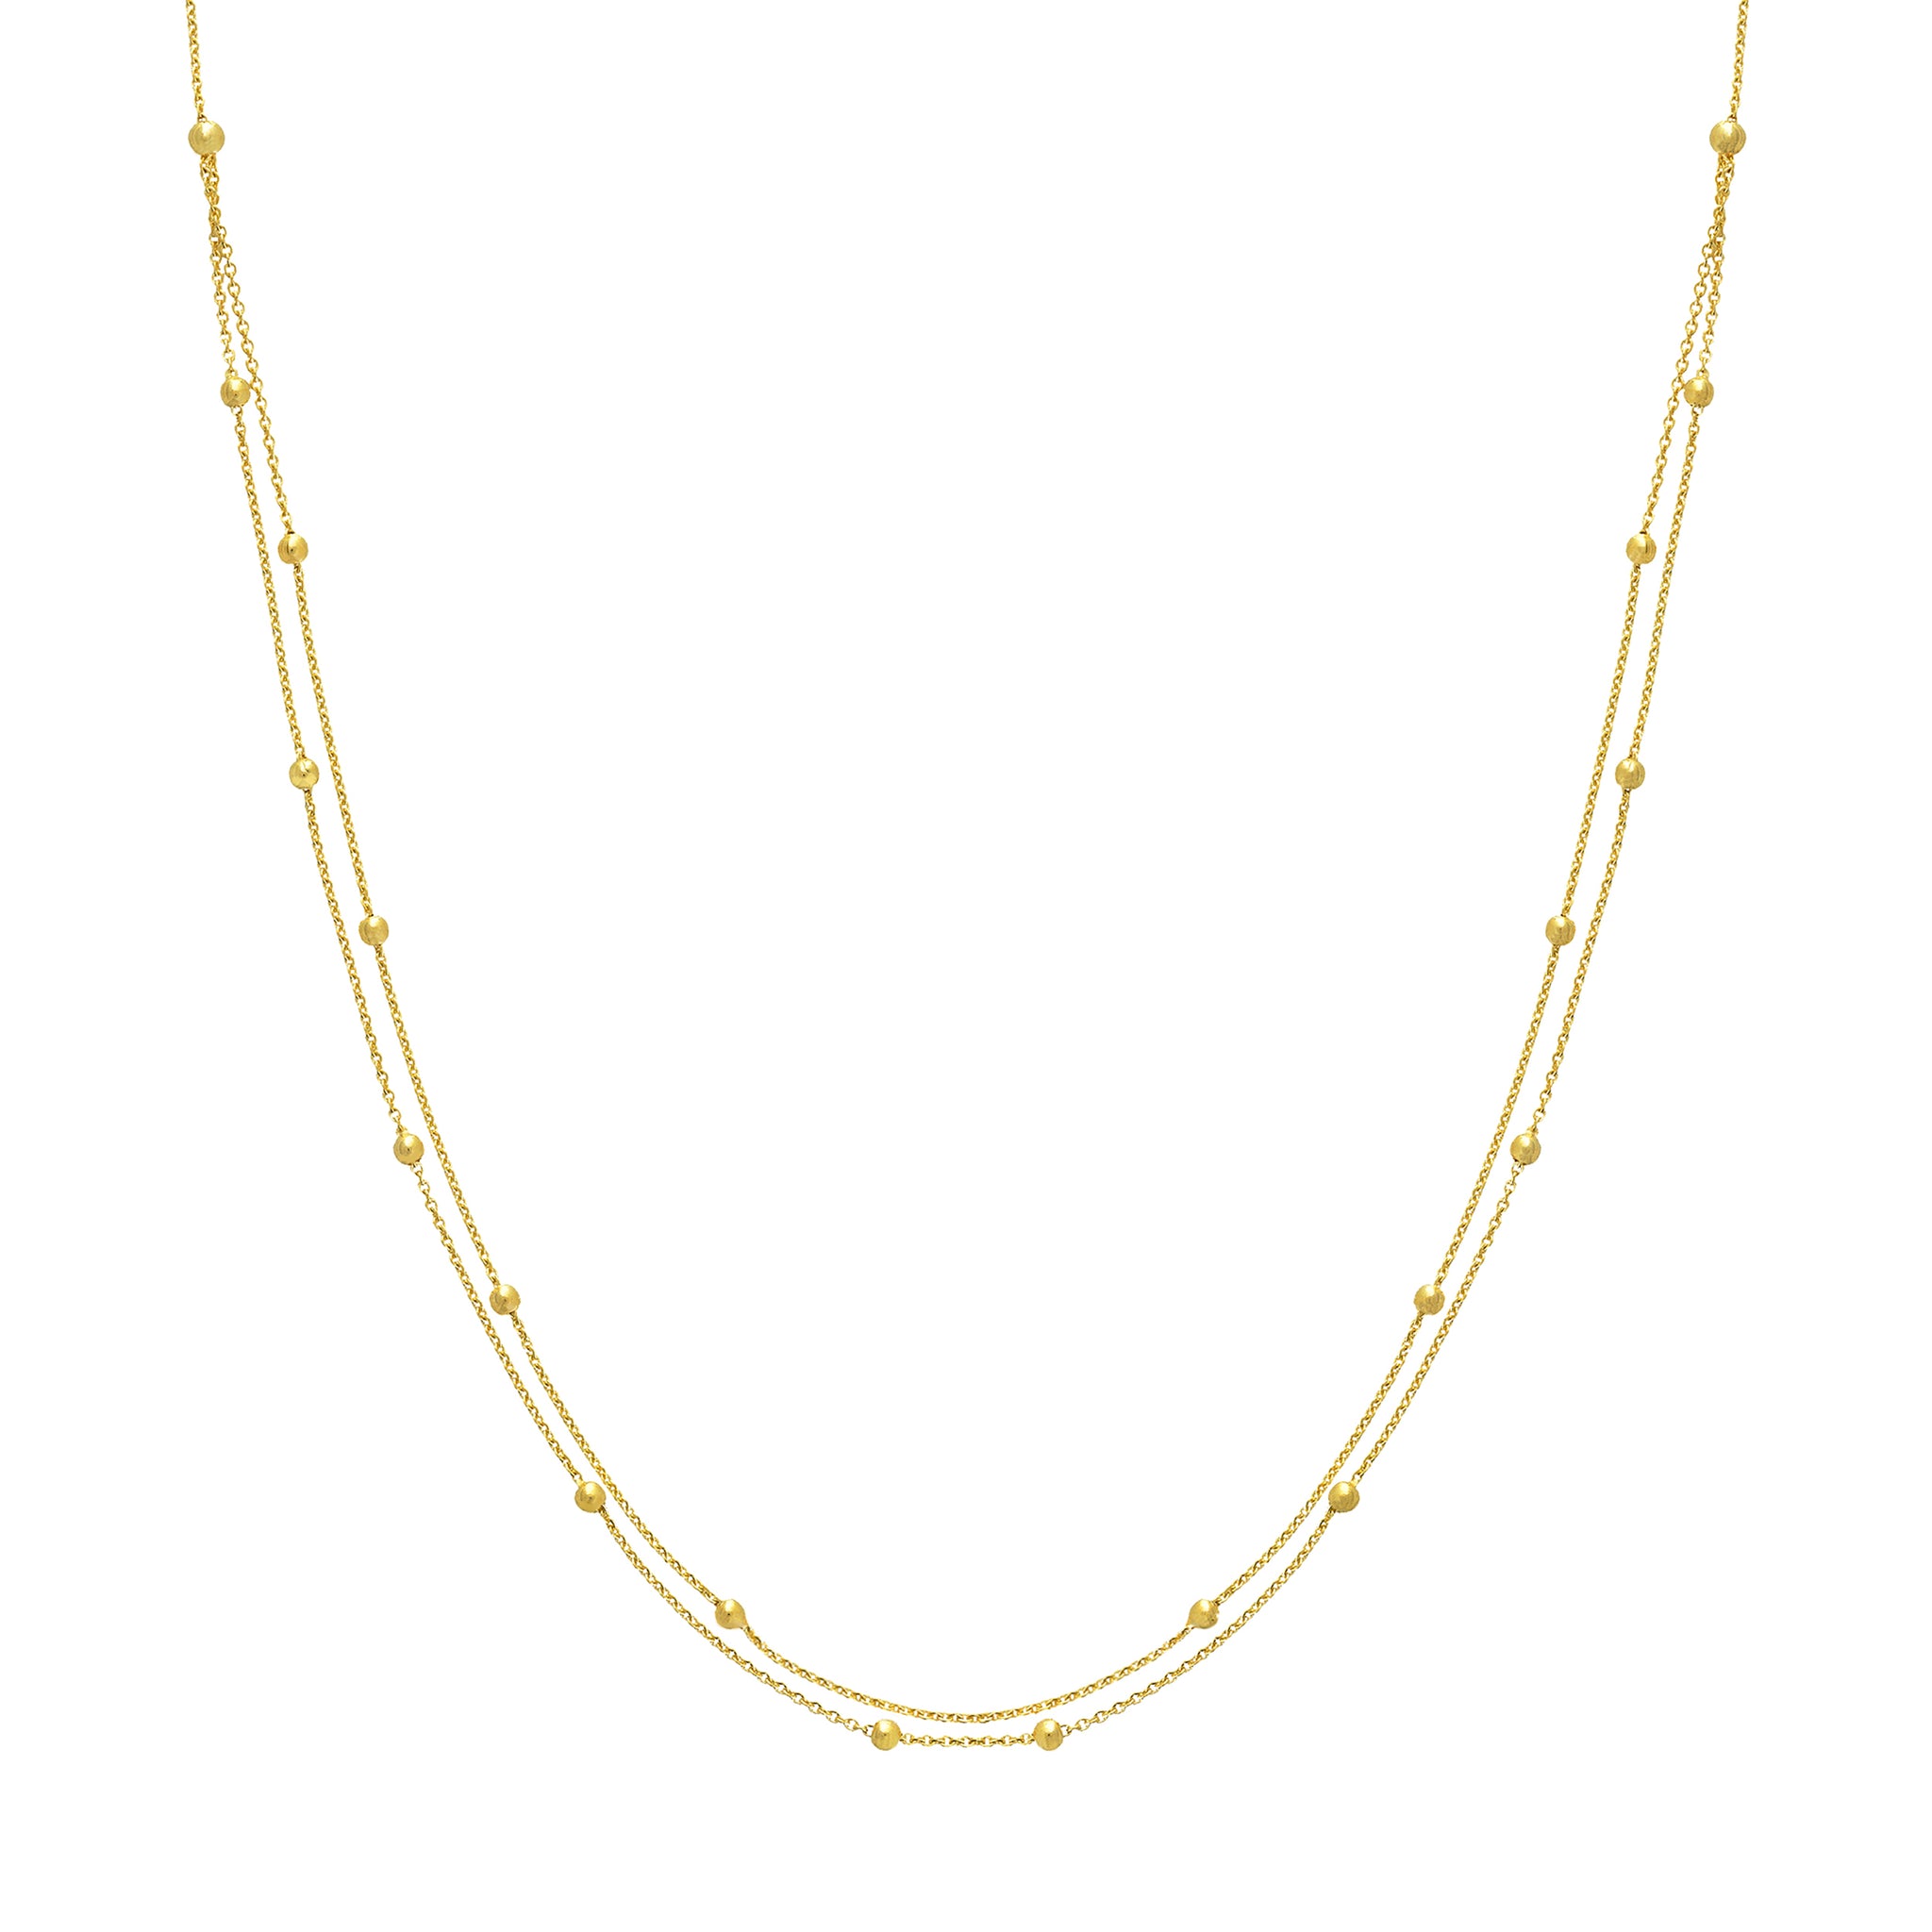 Hemsleys Collection 14K Yellow Gold Double Strand Beads-By-The-Yard Necklace